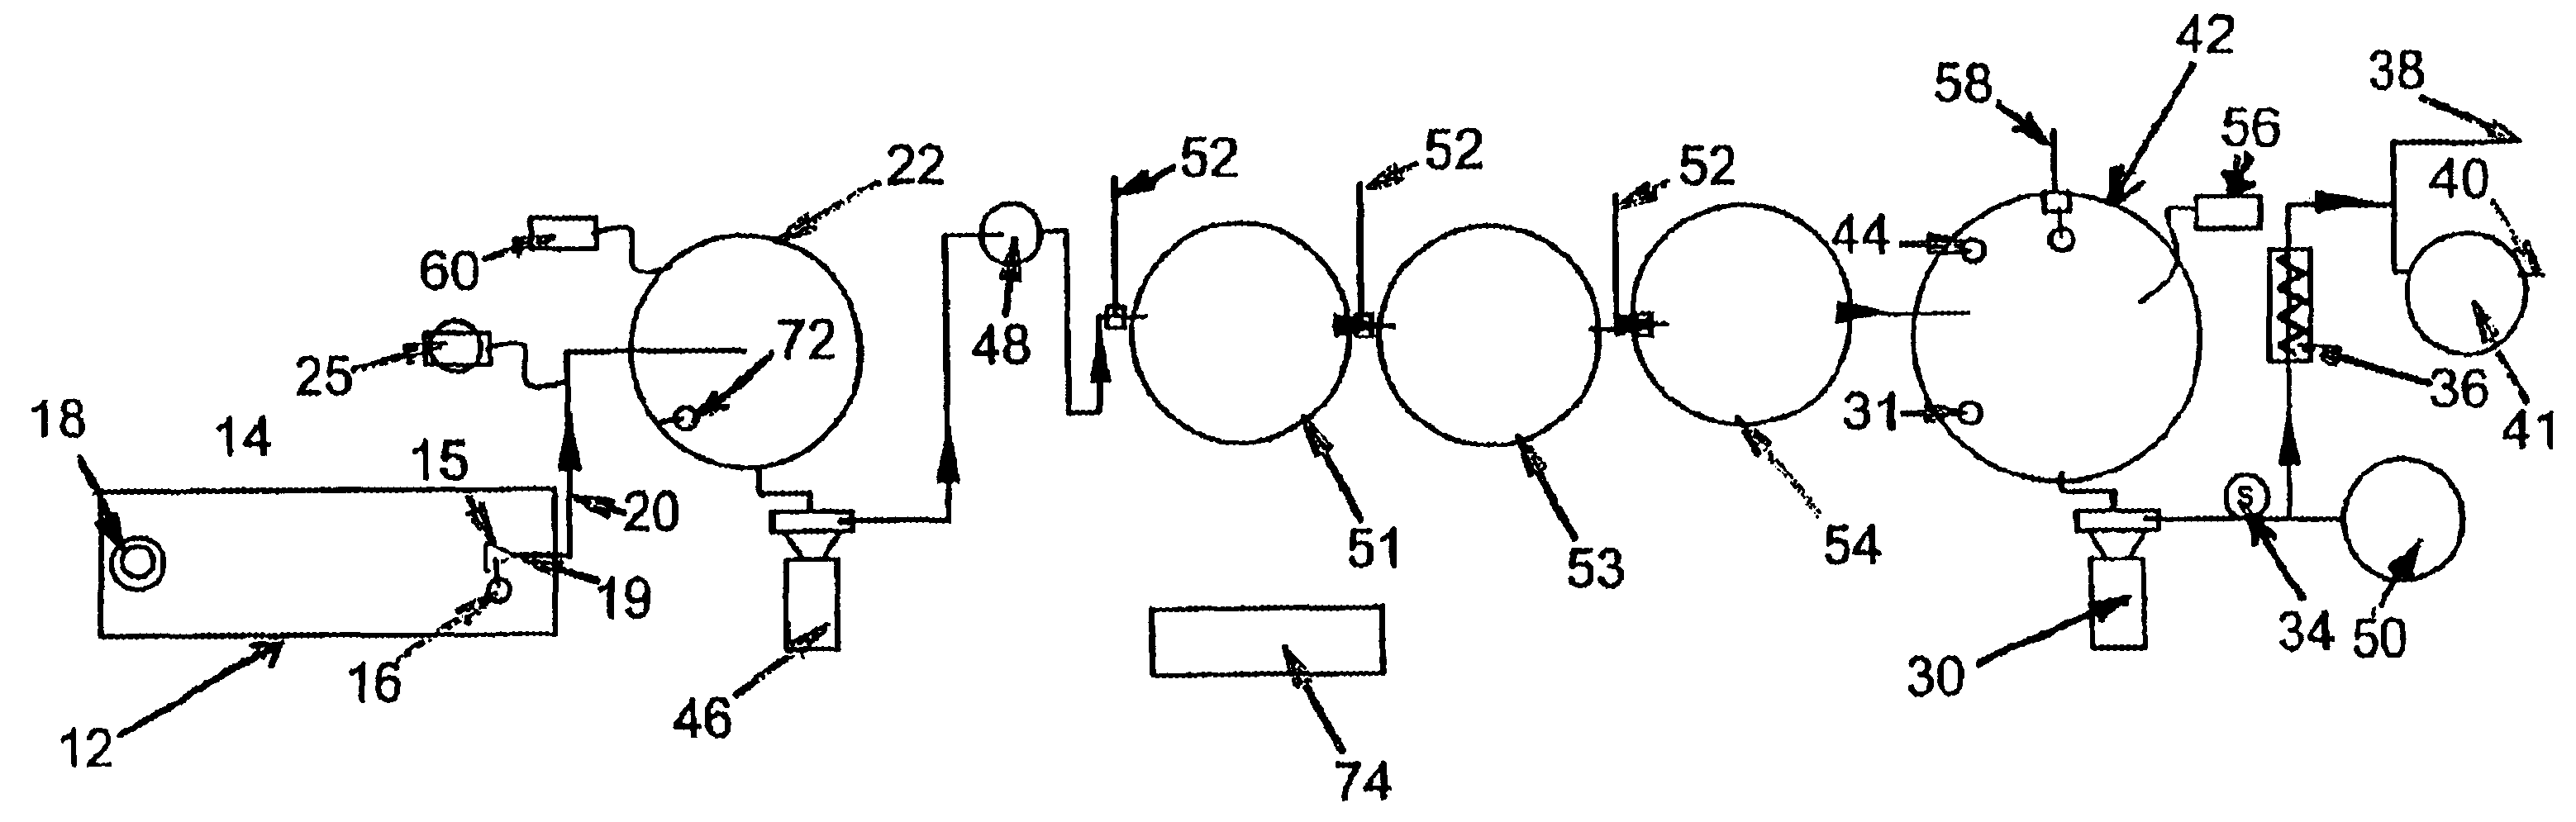 Method and apparatus for recovery of waste water